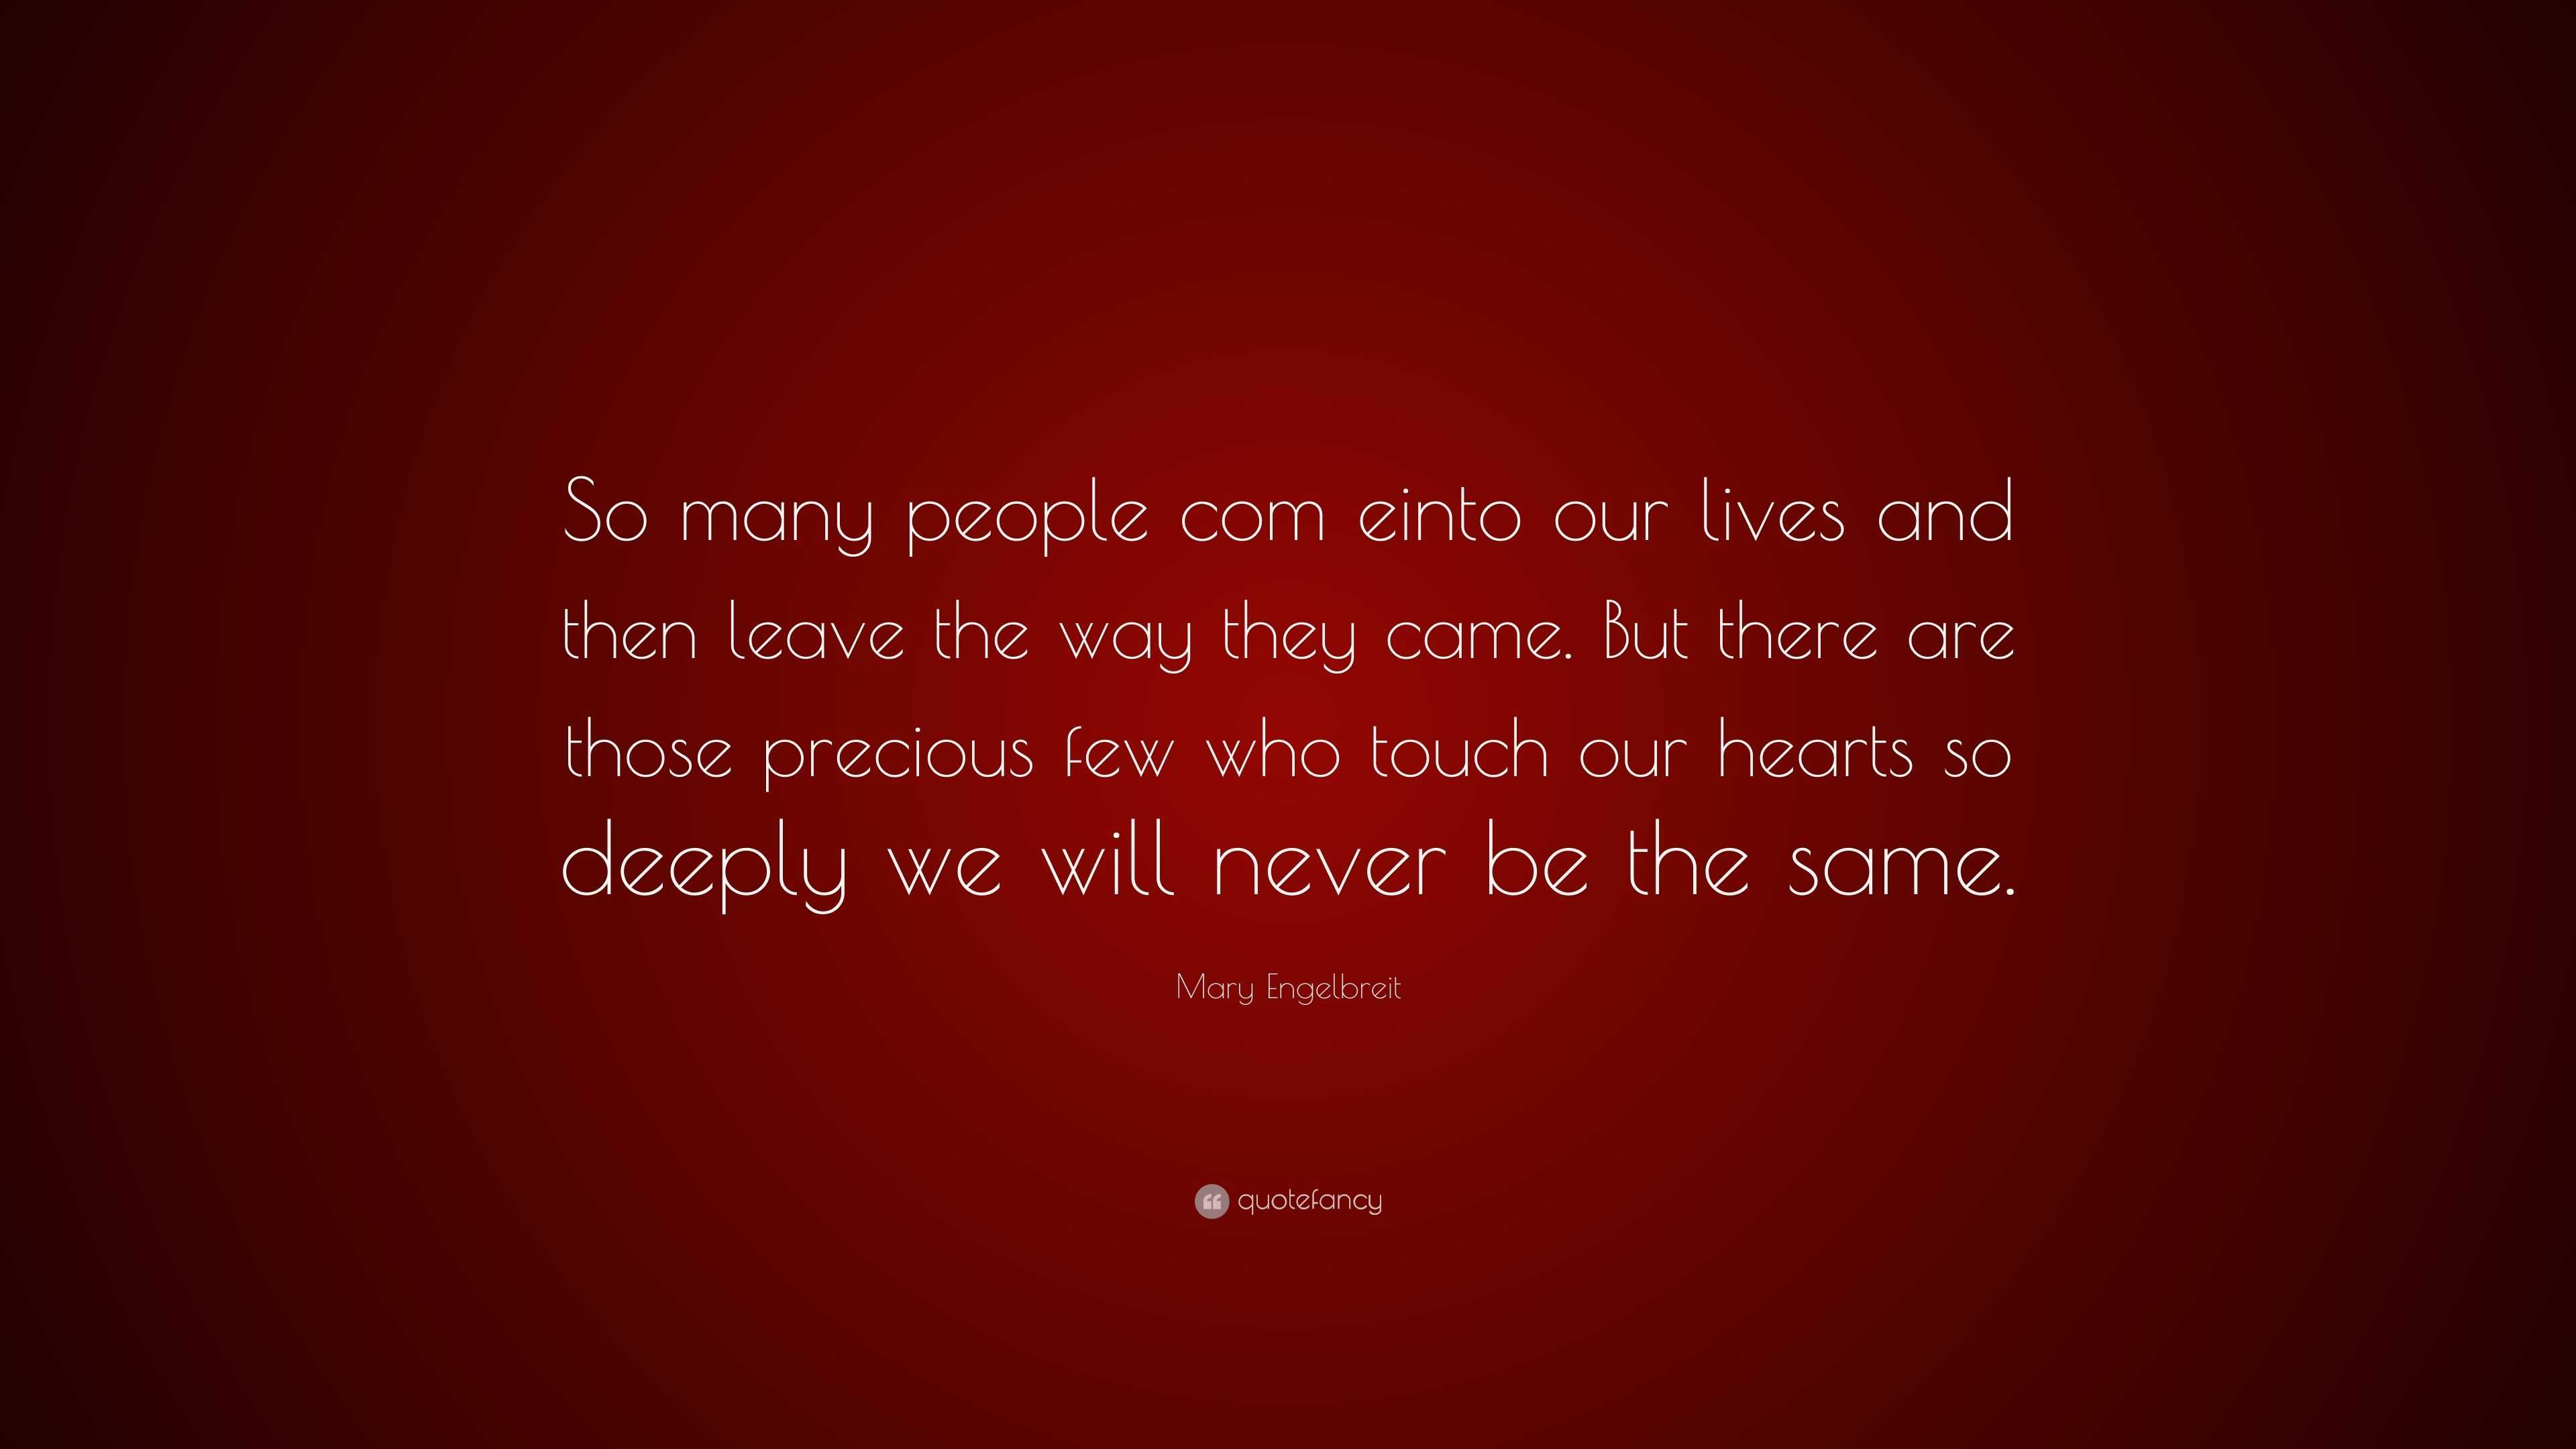 Mary Engelbreit Quote: “So many people com einto our lives and then ...